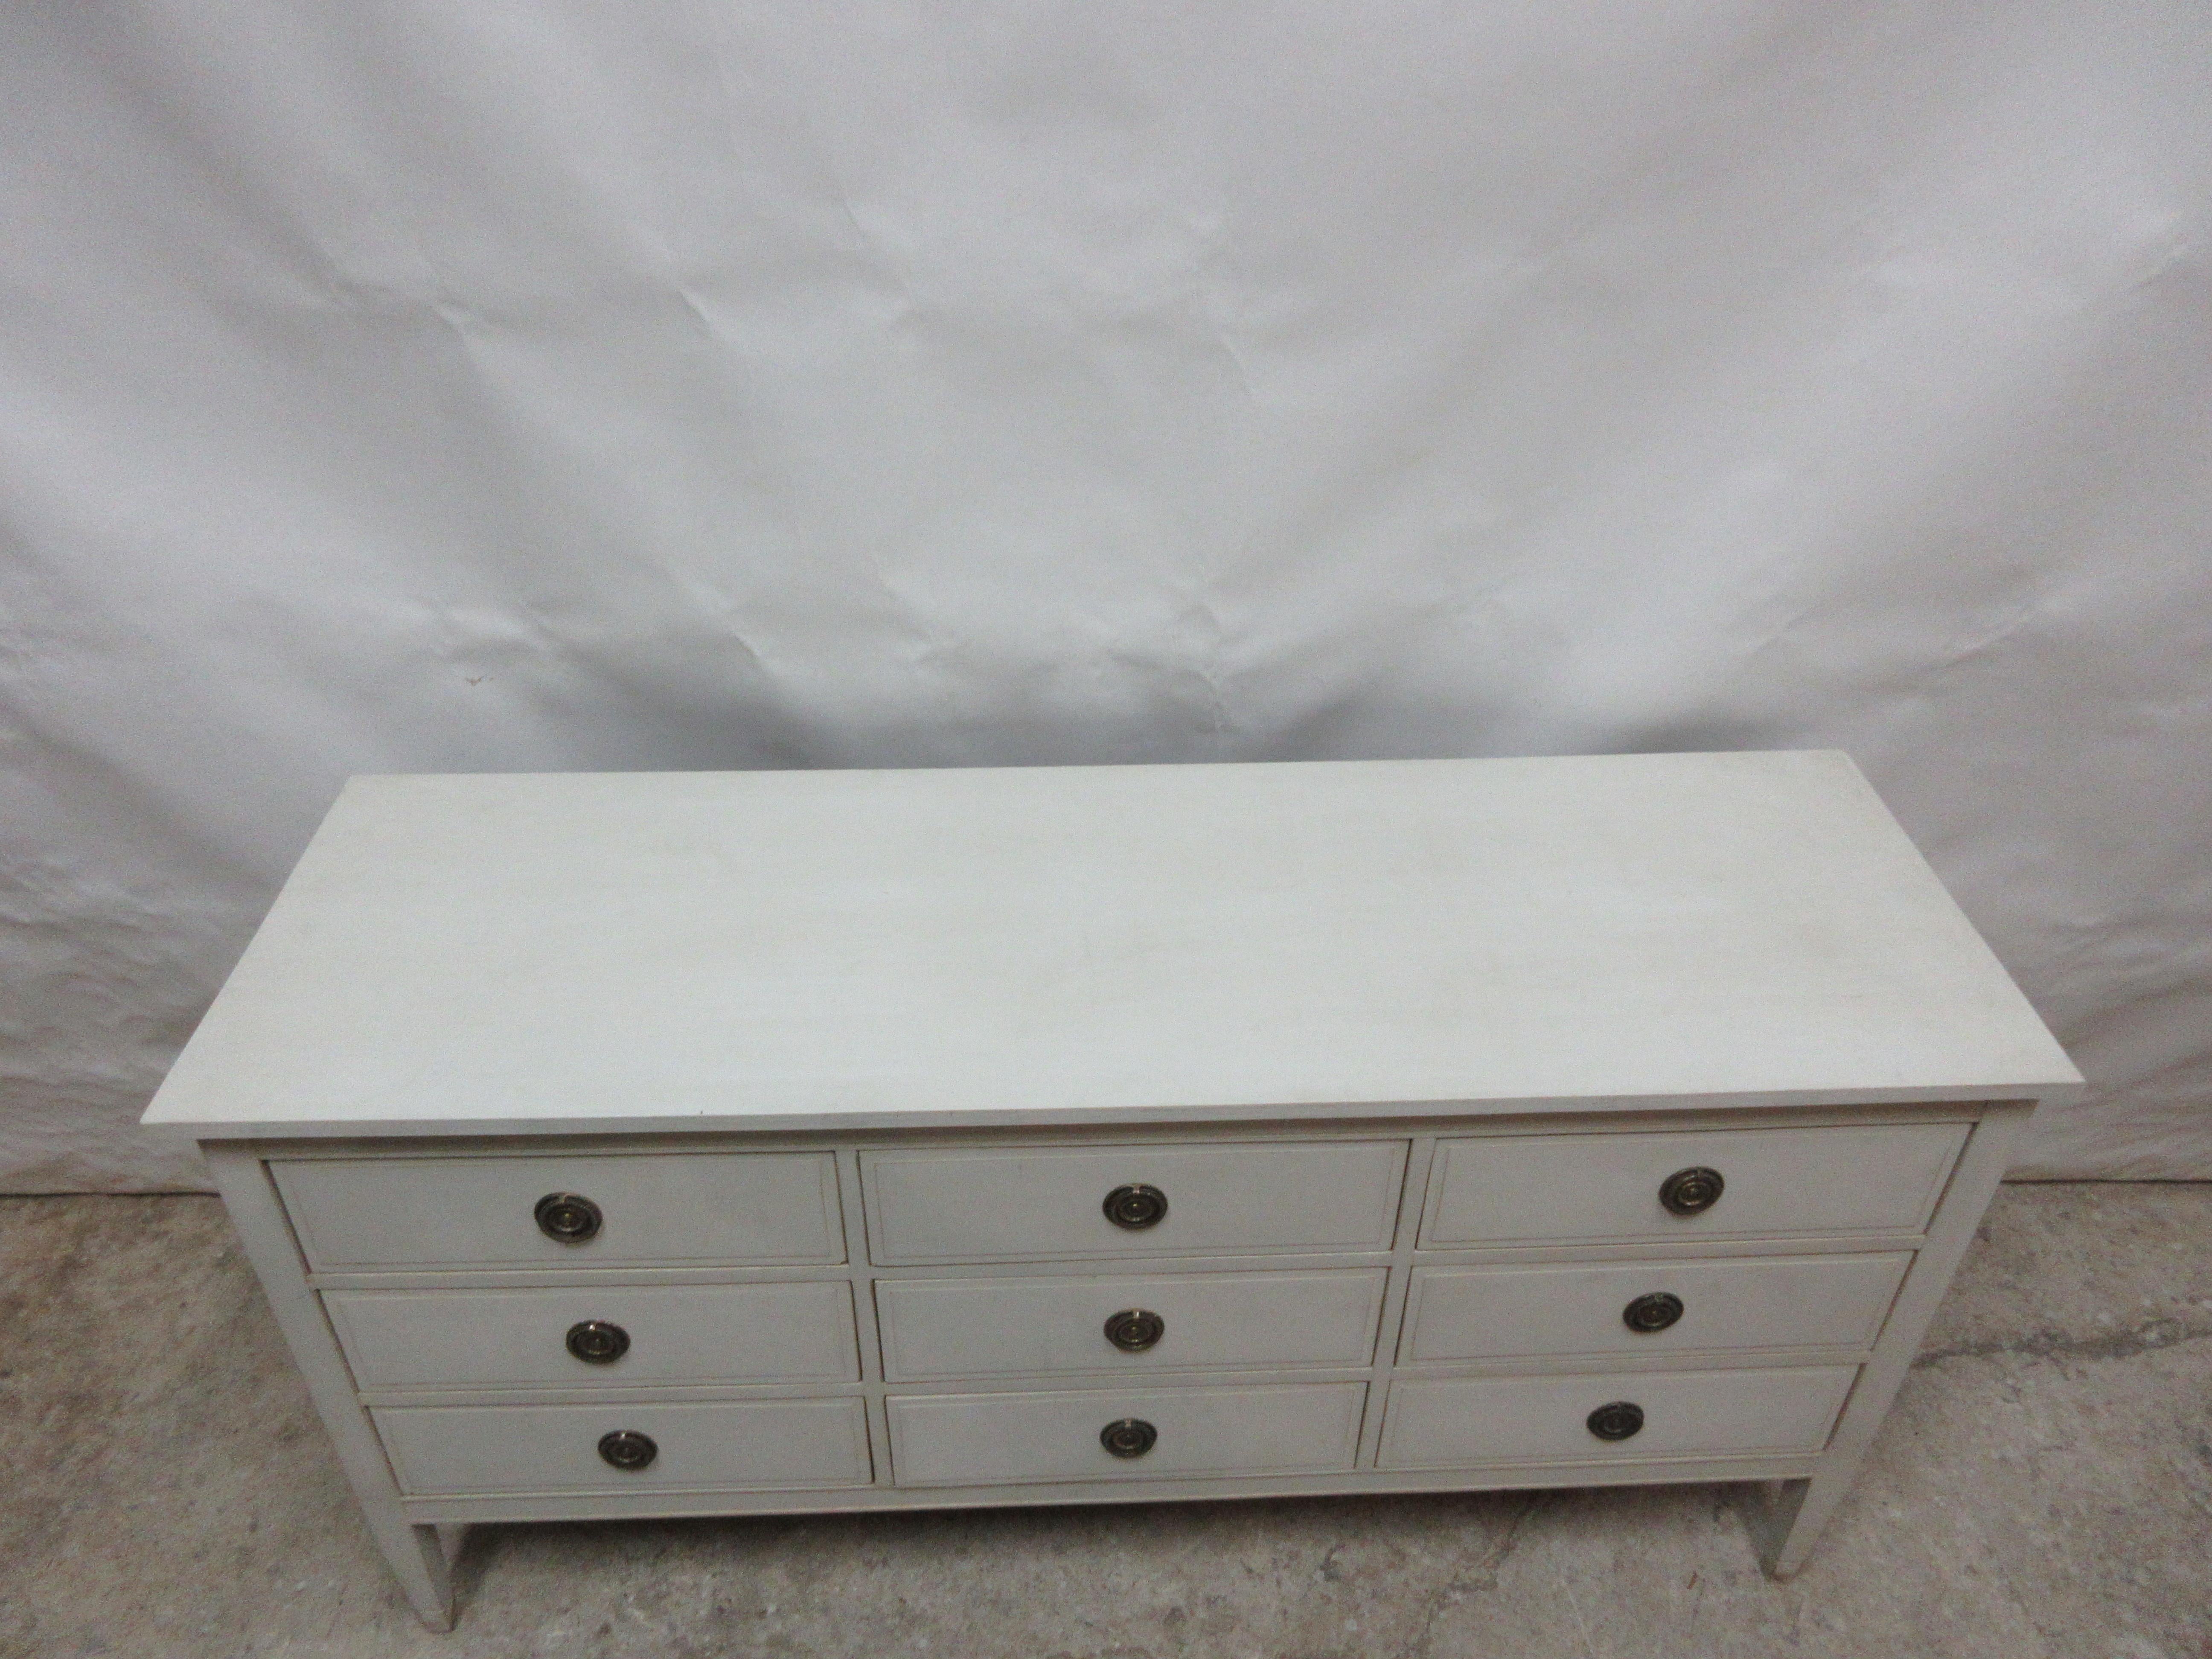 This is a Gustavian style 9 drawer dresser. Its been restored and repainted with Milk Paints 